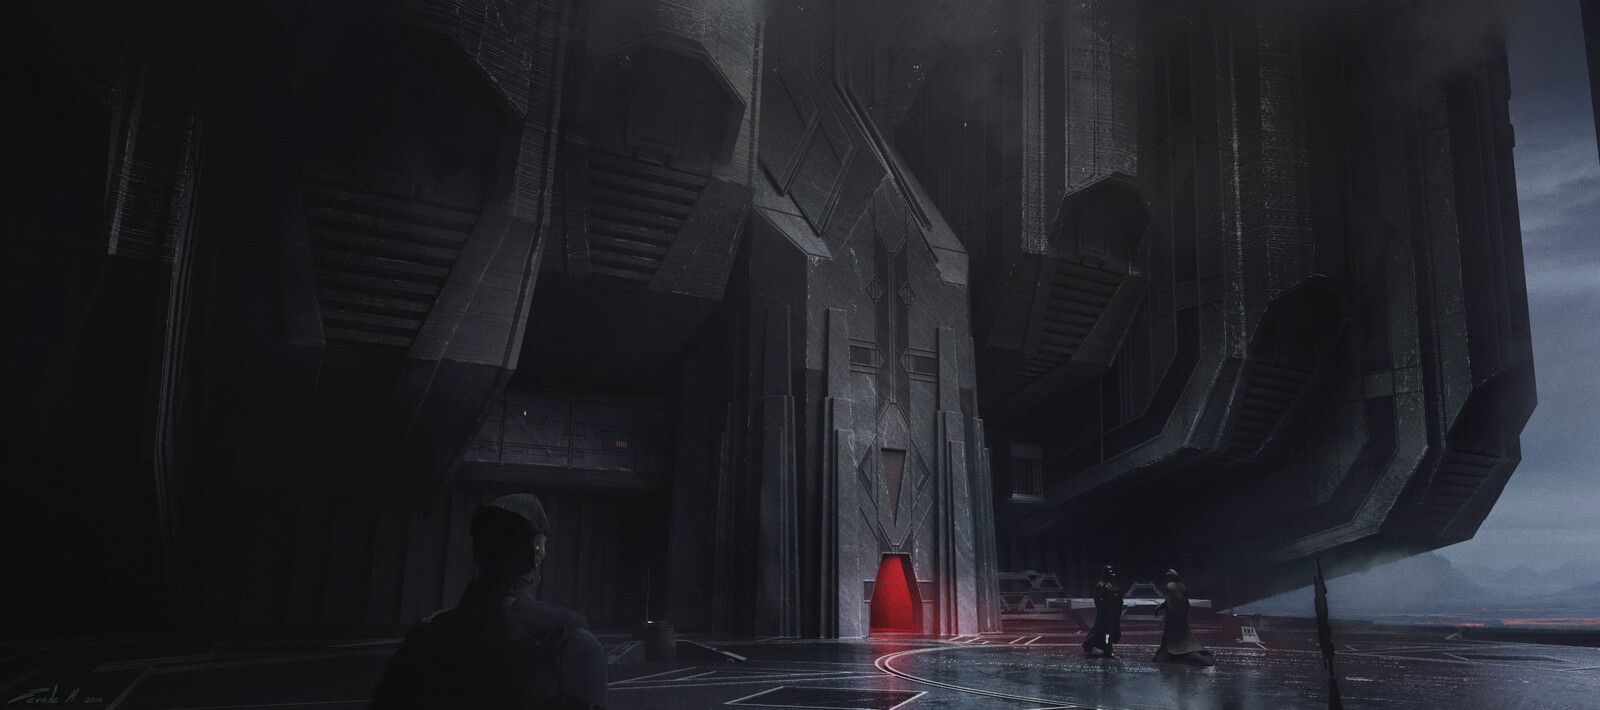 Design language was meant to reflect the aesthetics of Rogue One's Vader Castle meeting room which was designed by my friend Brett Northcutt and myself.